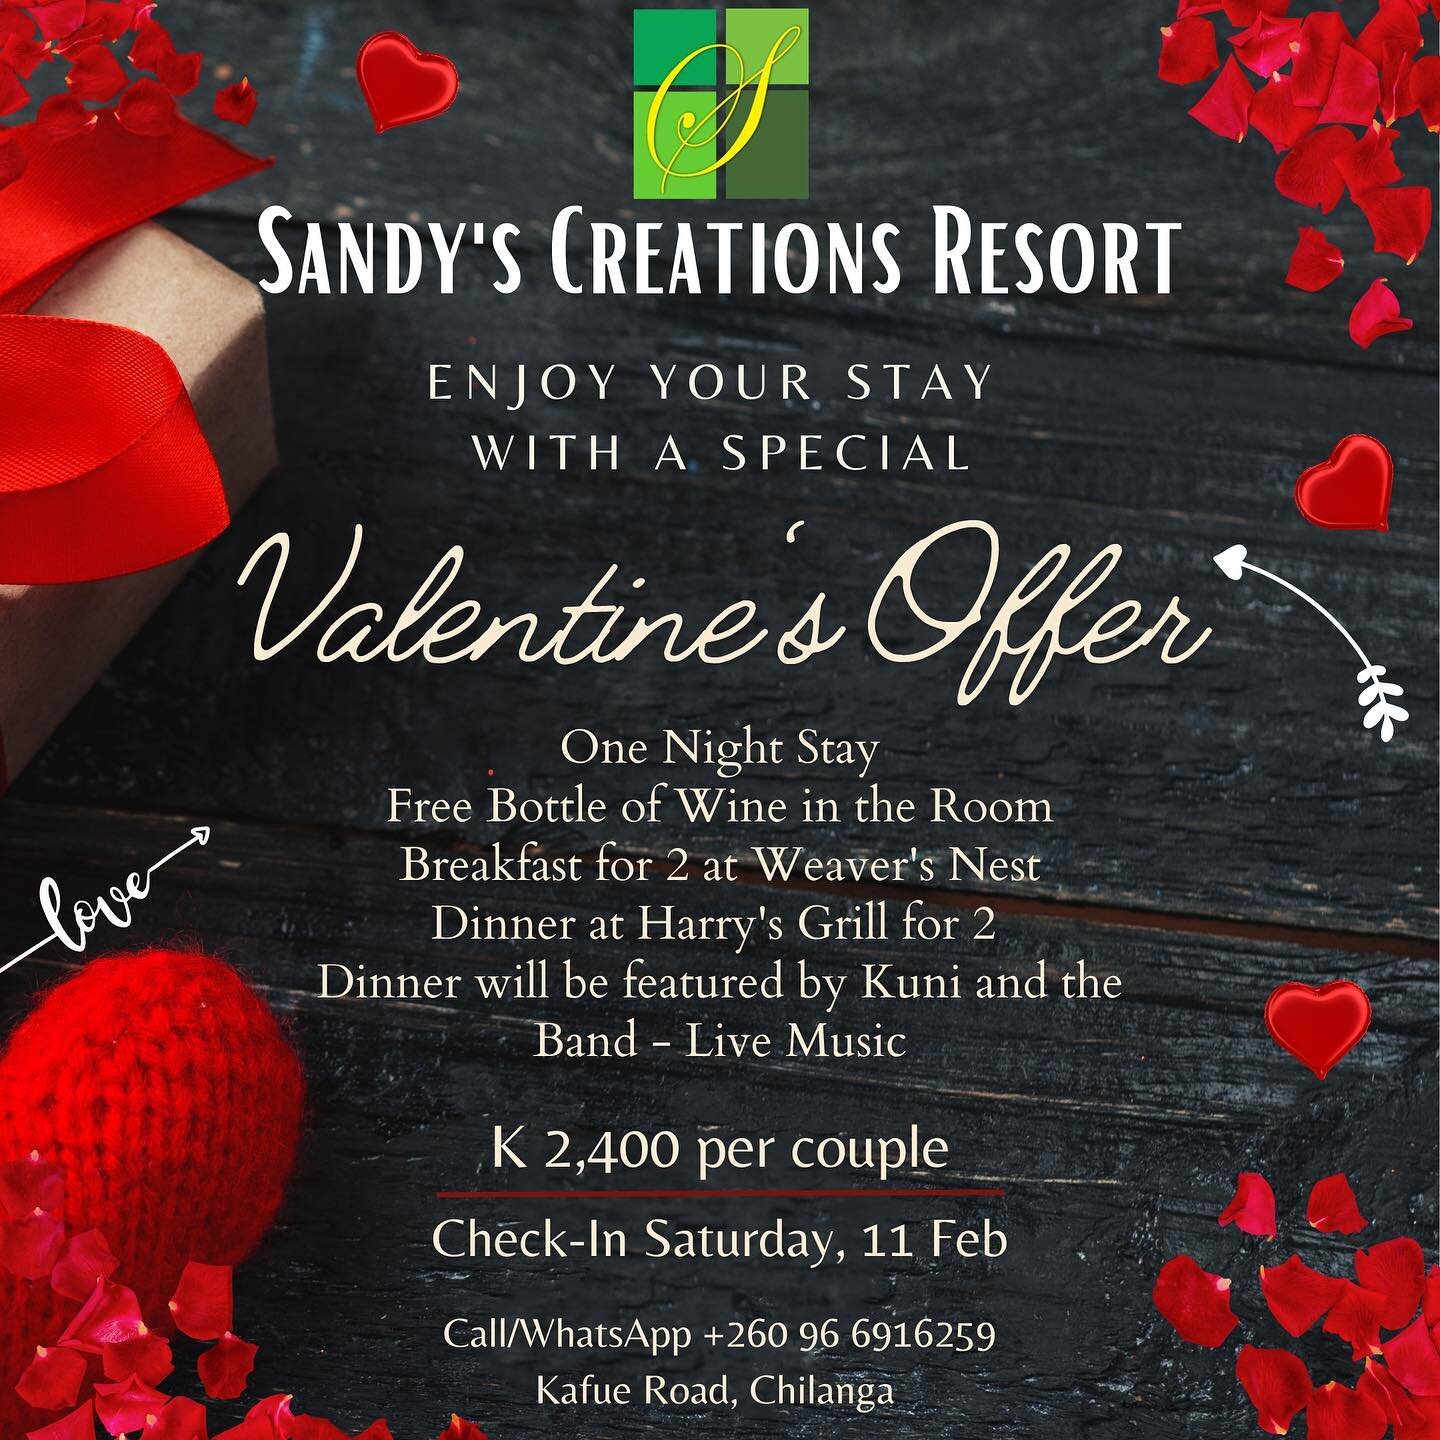 A Very Special Valentine @sandyscreationsresort !
Enjoy your Romantic Date at Sandy&rsquo;s Creations Resort with an Extraordinary Stay in the lodge with a dinner @harrysgrillscr !
The Dinner at Harry&rsquo;s Grill will be Featured by a Live Performa